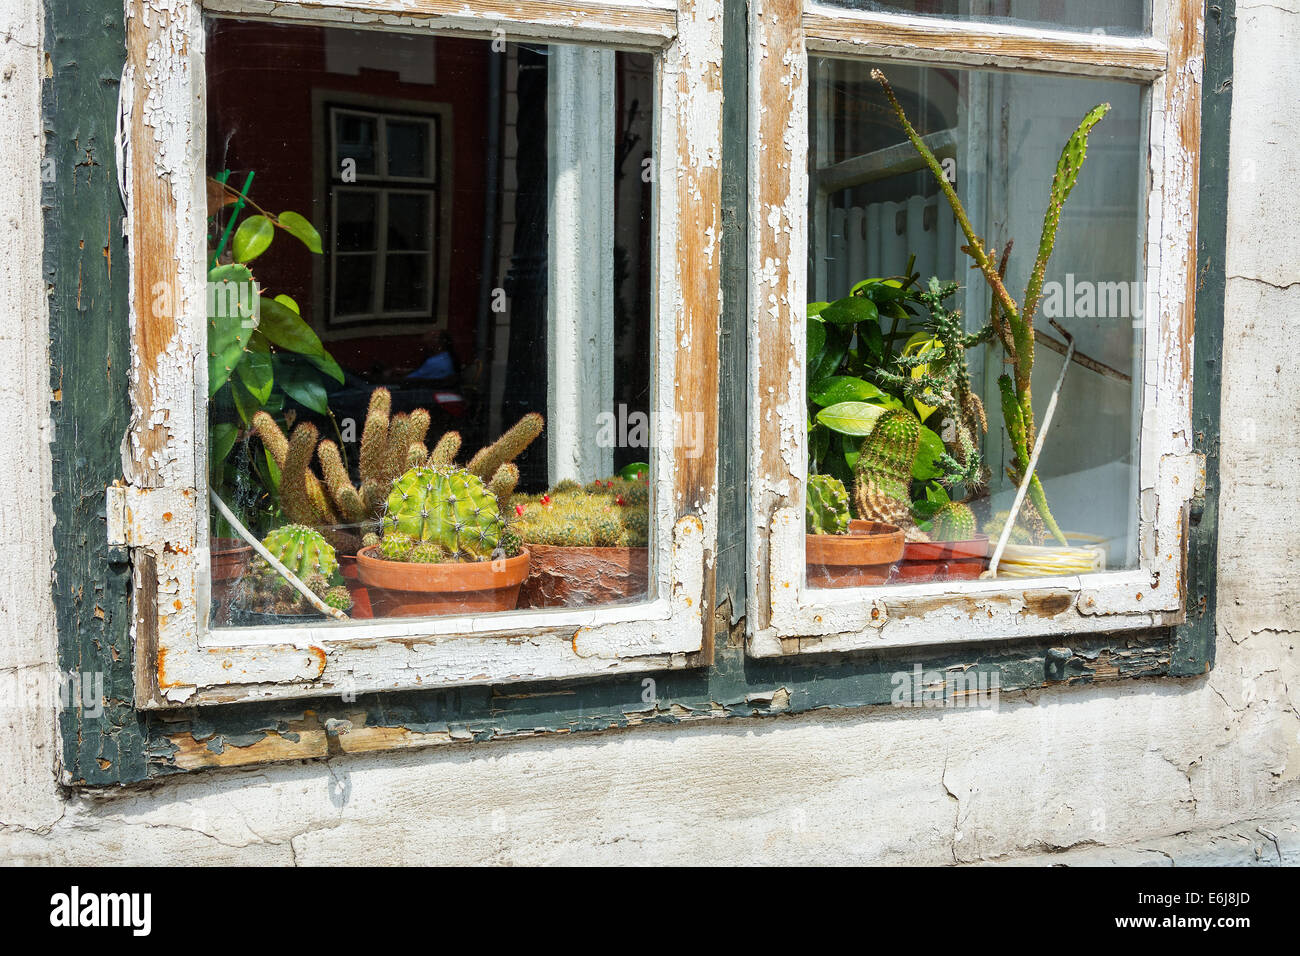 Cacti on display on a window sill with peeling wooden frame Stock Photo